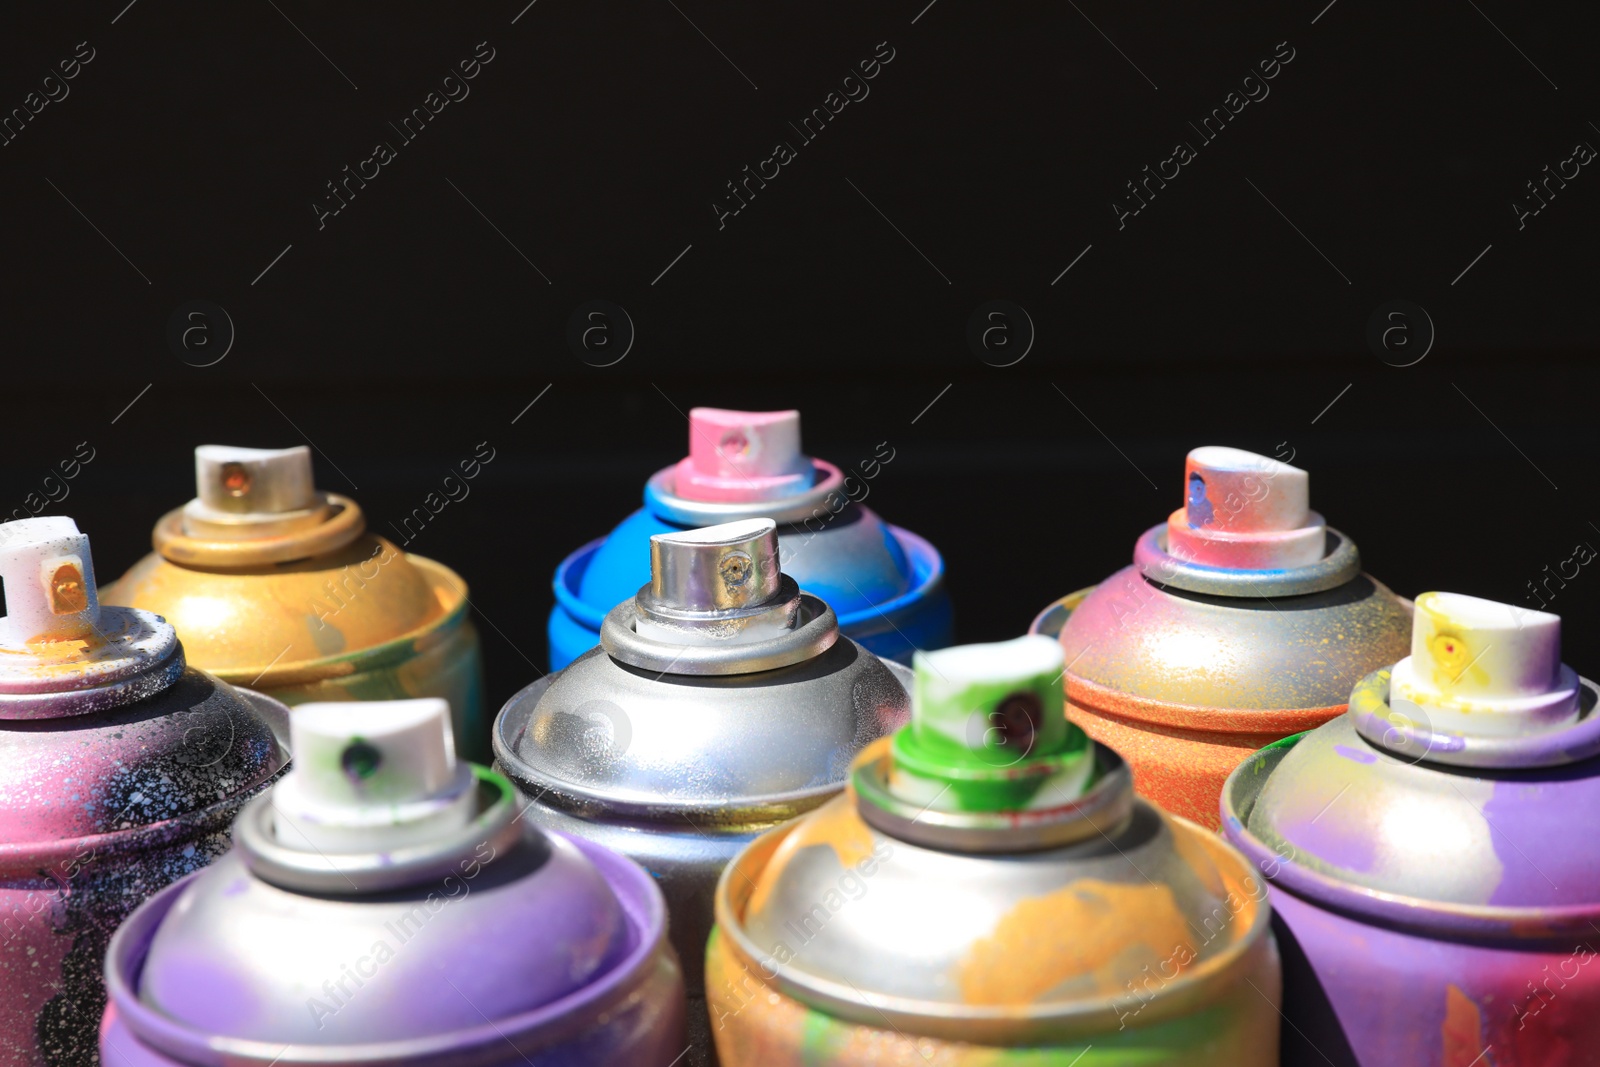 Photo of Used cans of spray paint on dark background, closeup. Graffiti supplies